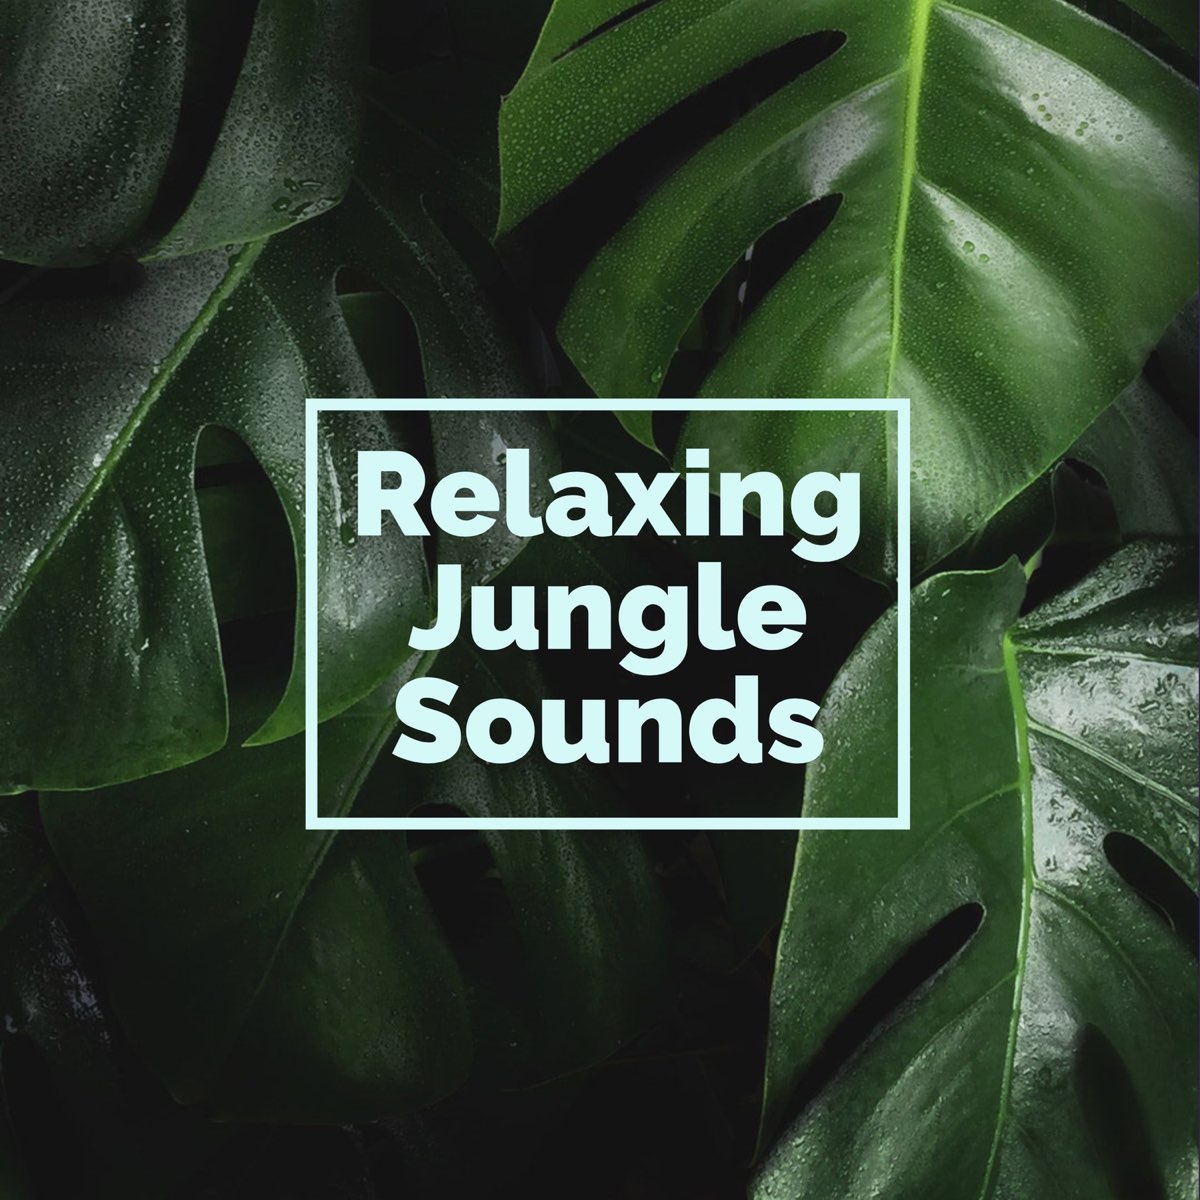 Relaxing Jungle Sounds by Nature Sounds & Rainforest Sounds on Apple Music